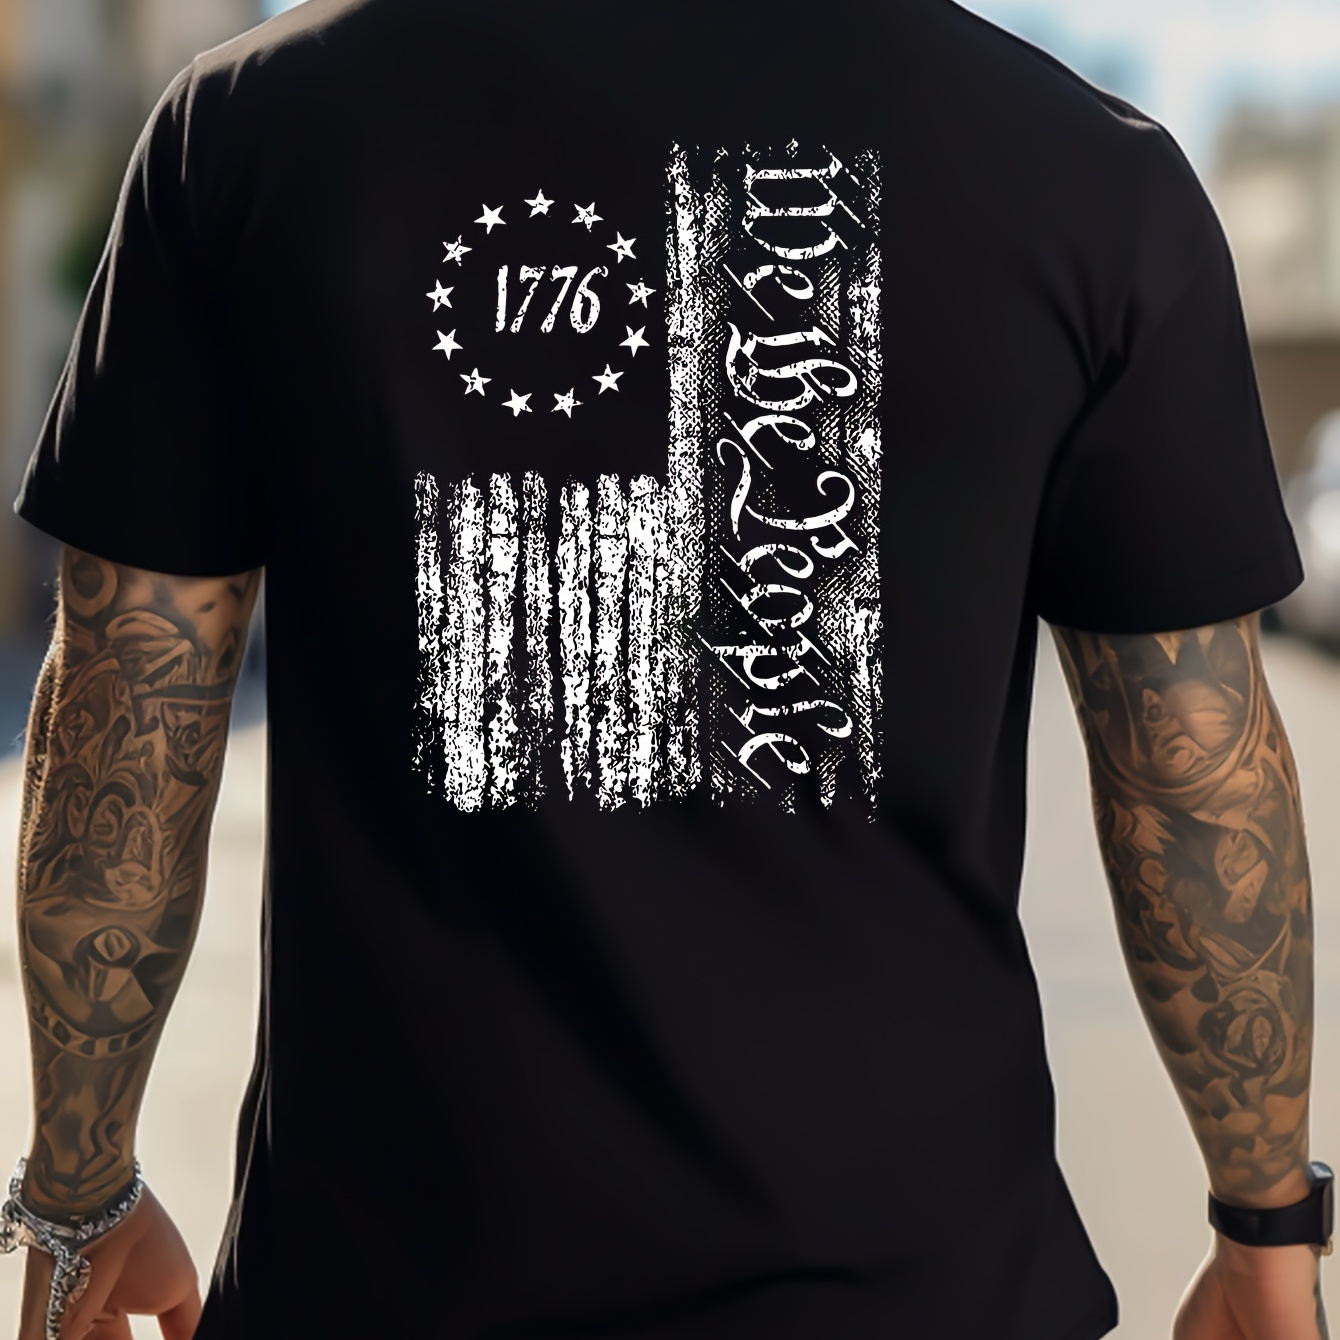 

1776 Flag And Star Print Tee Shirt, Tees For Men, Casual Short Sleeve T-shirt For Summer